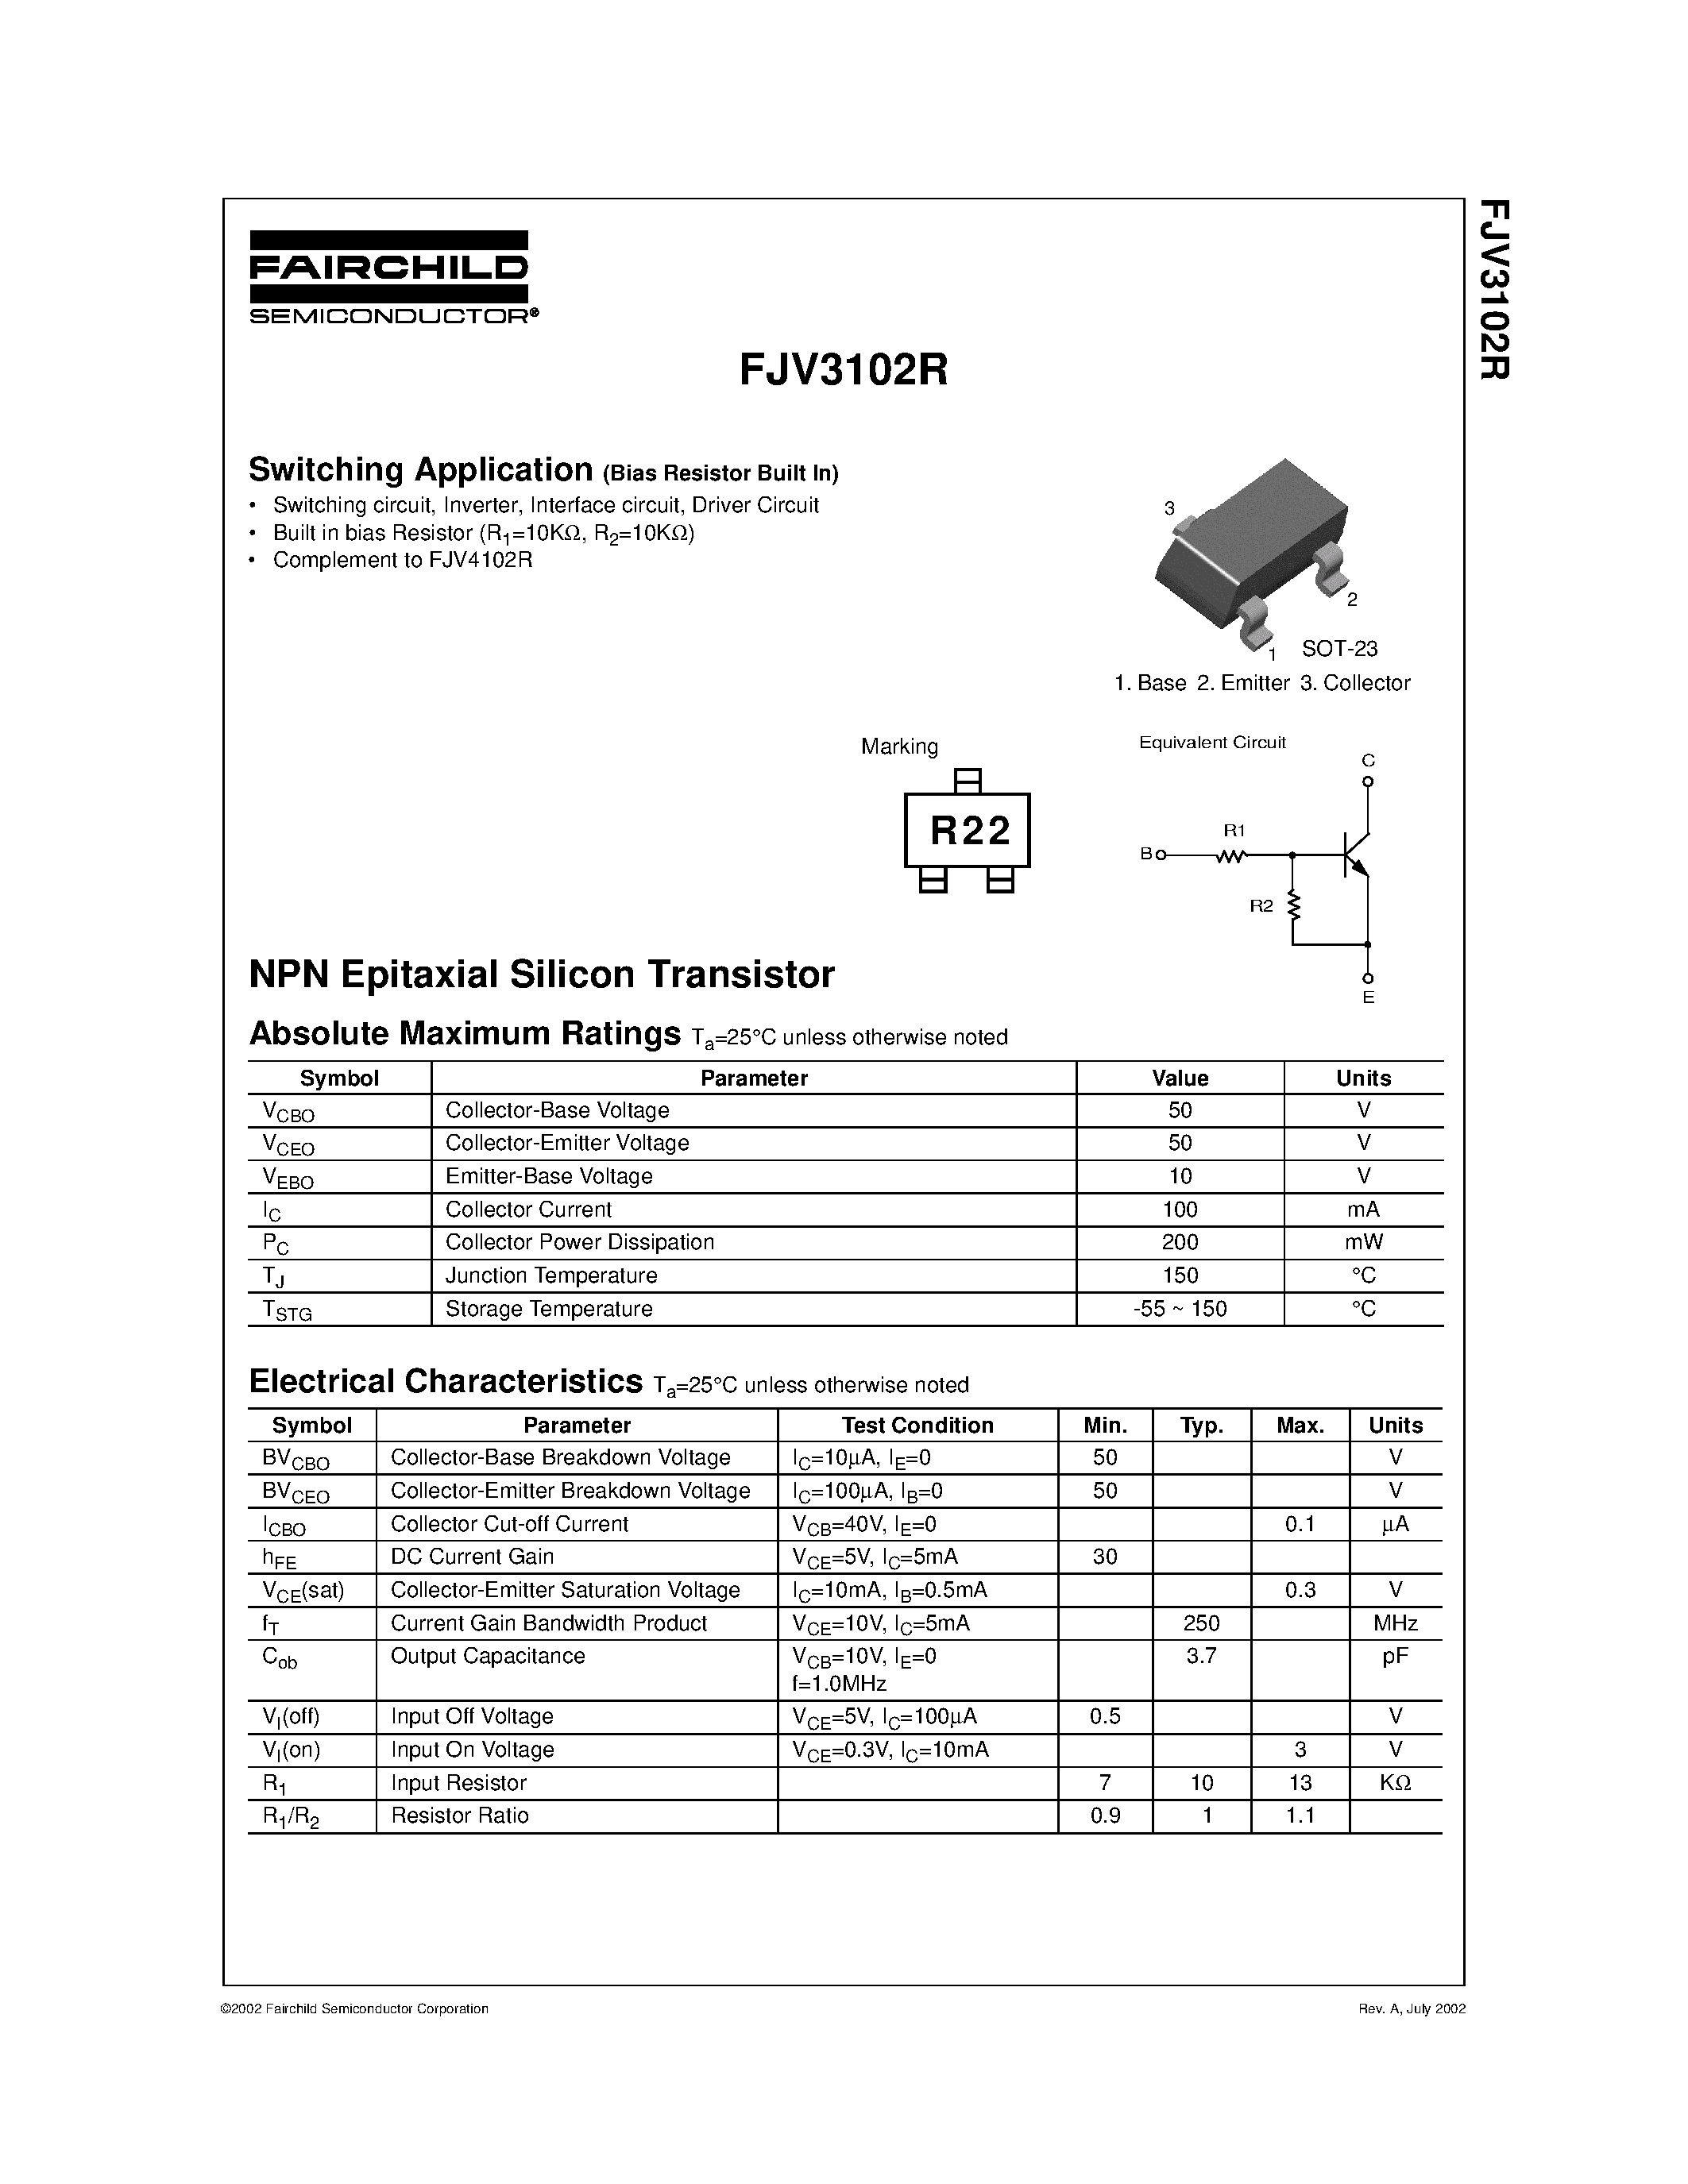 Datasheet FJV3102 - NPN Epitaxial Silicon Transistor page 1